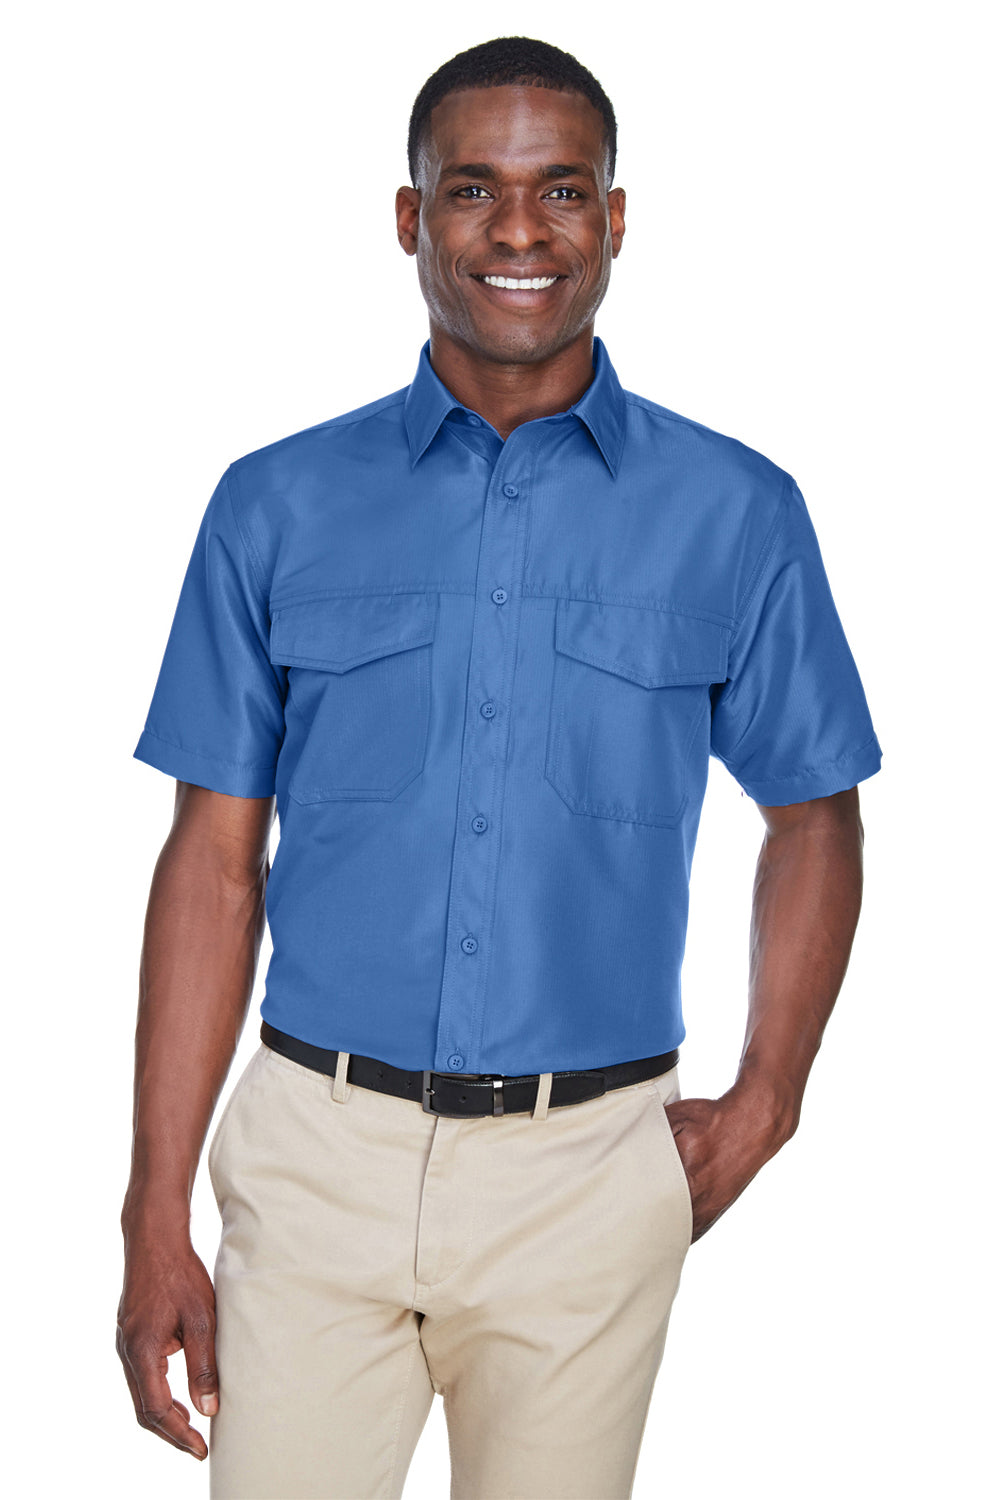 Harriton M580 Mens Key West Performance Short Sleeve Button Down Shirt w/ Double Pockets Pool Blue Front